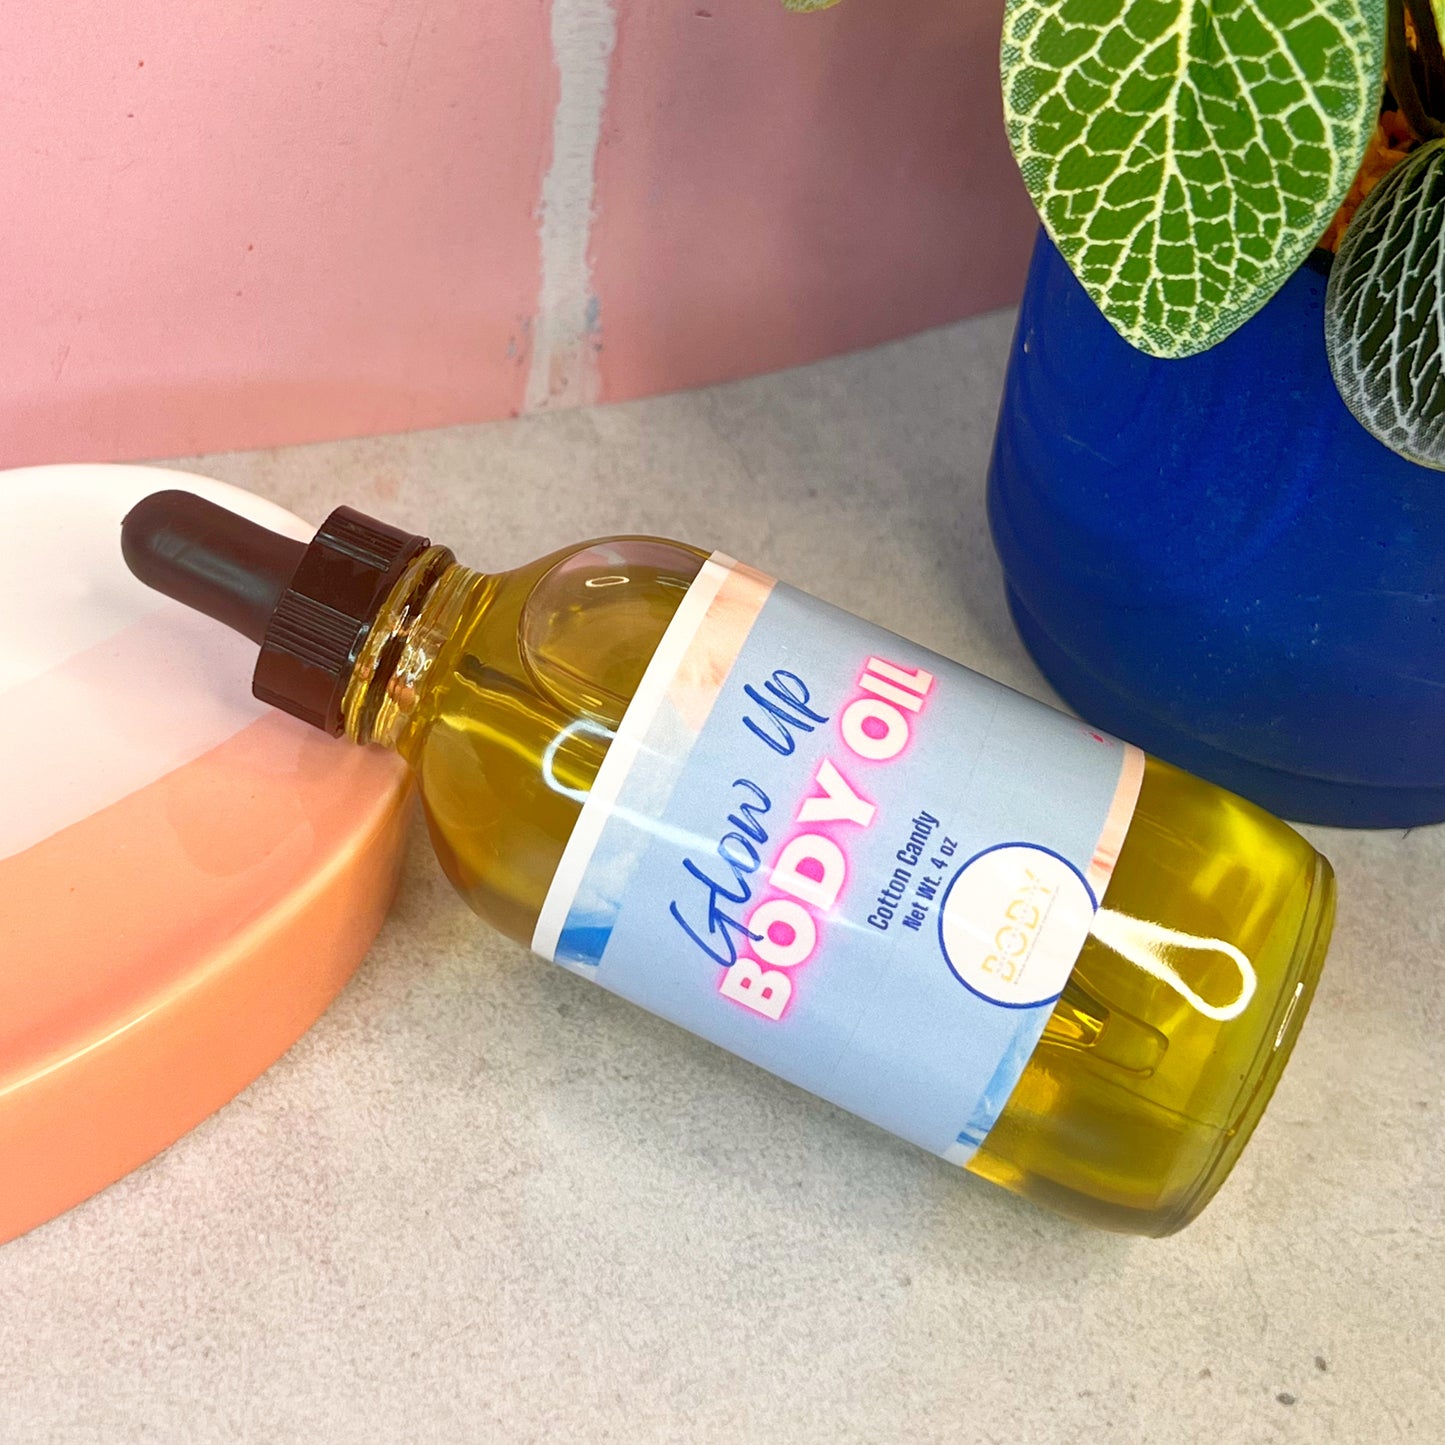 Glow Up Body Oil- Cotton Candy